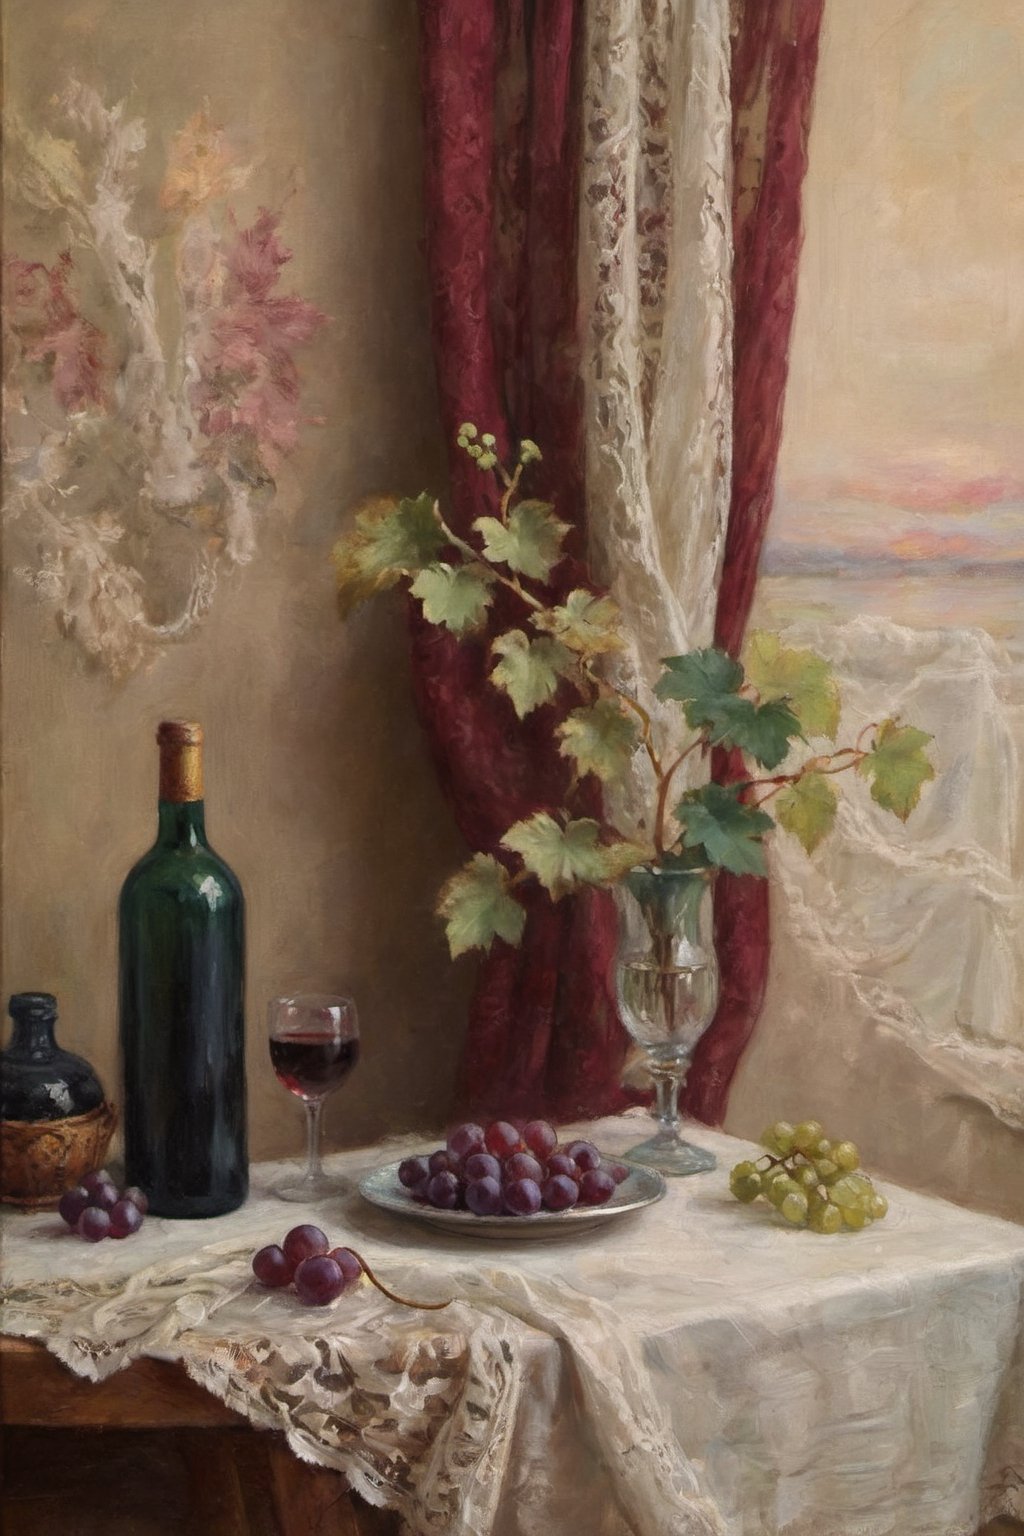 Still life oil painting. On the table, on a pleated, lace tablecloth, there is a large plate ((one plate)) with red grapes with leaves in the color of rotten green with a touch of yellow and burgundy. Next to it there is a glass and a beautiful carafe of red wine (beautifully illuminated). Sharp foreground. The perfect composition according to the golden ratio rule. Beautiful embroidered silk curtains, colors, beautiful side light. A masterpiece of painting in the style of Henri Fantin-Latour,painting